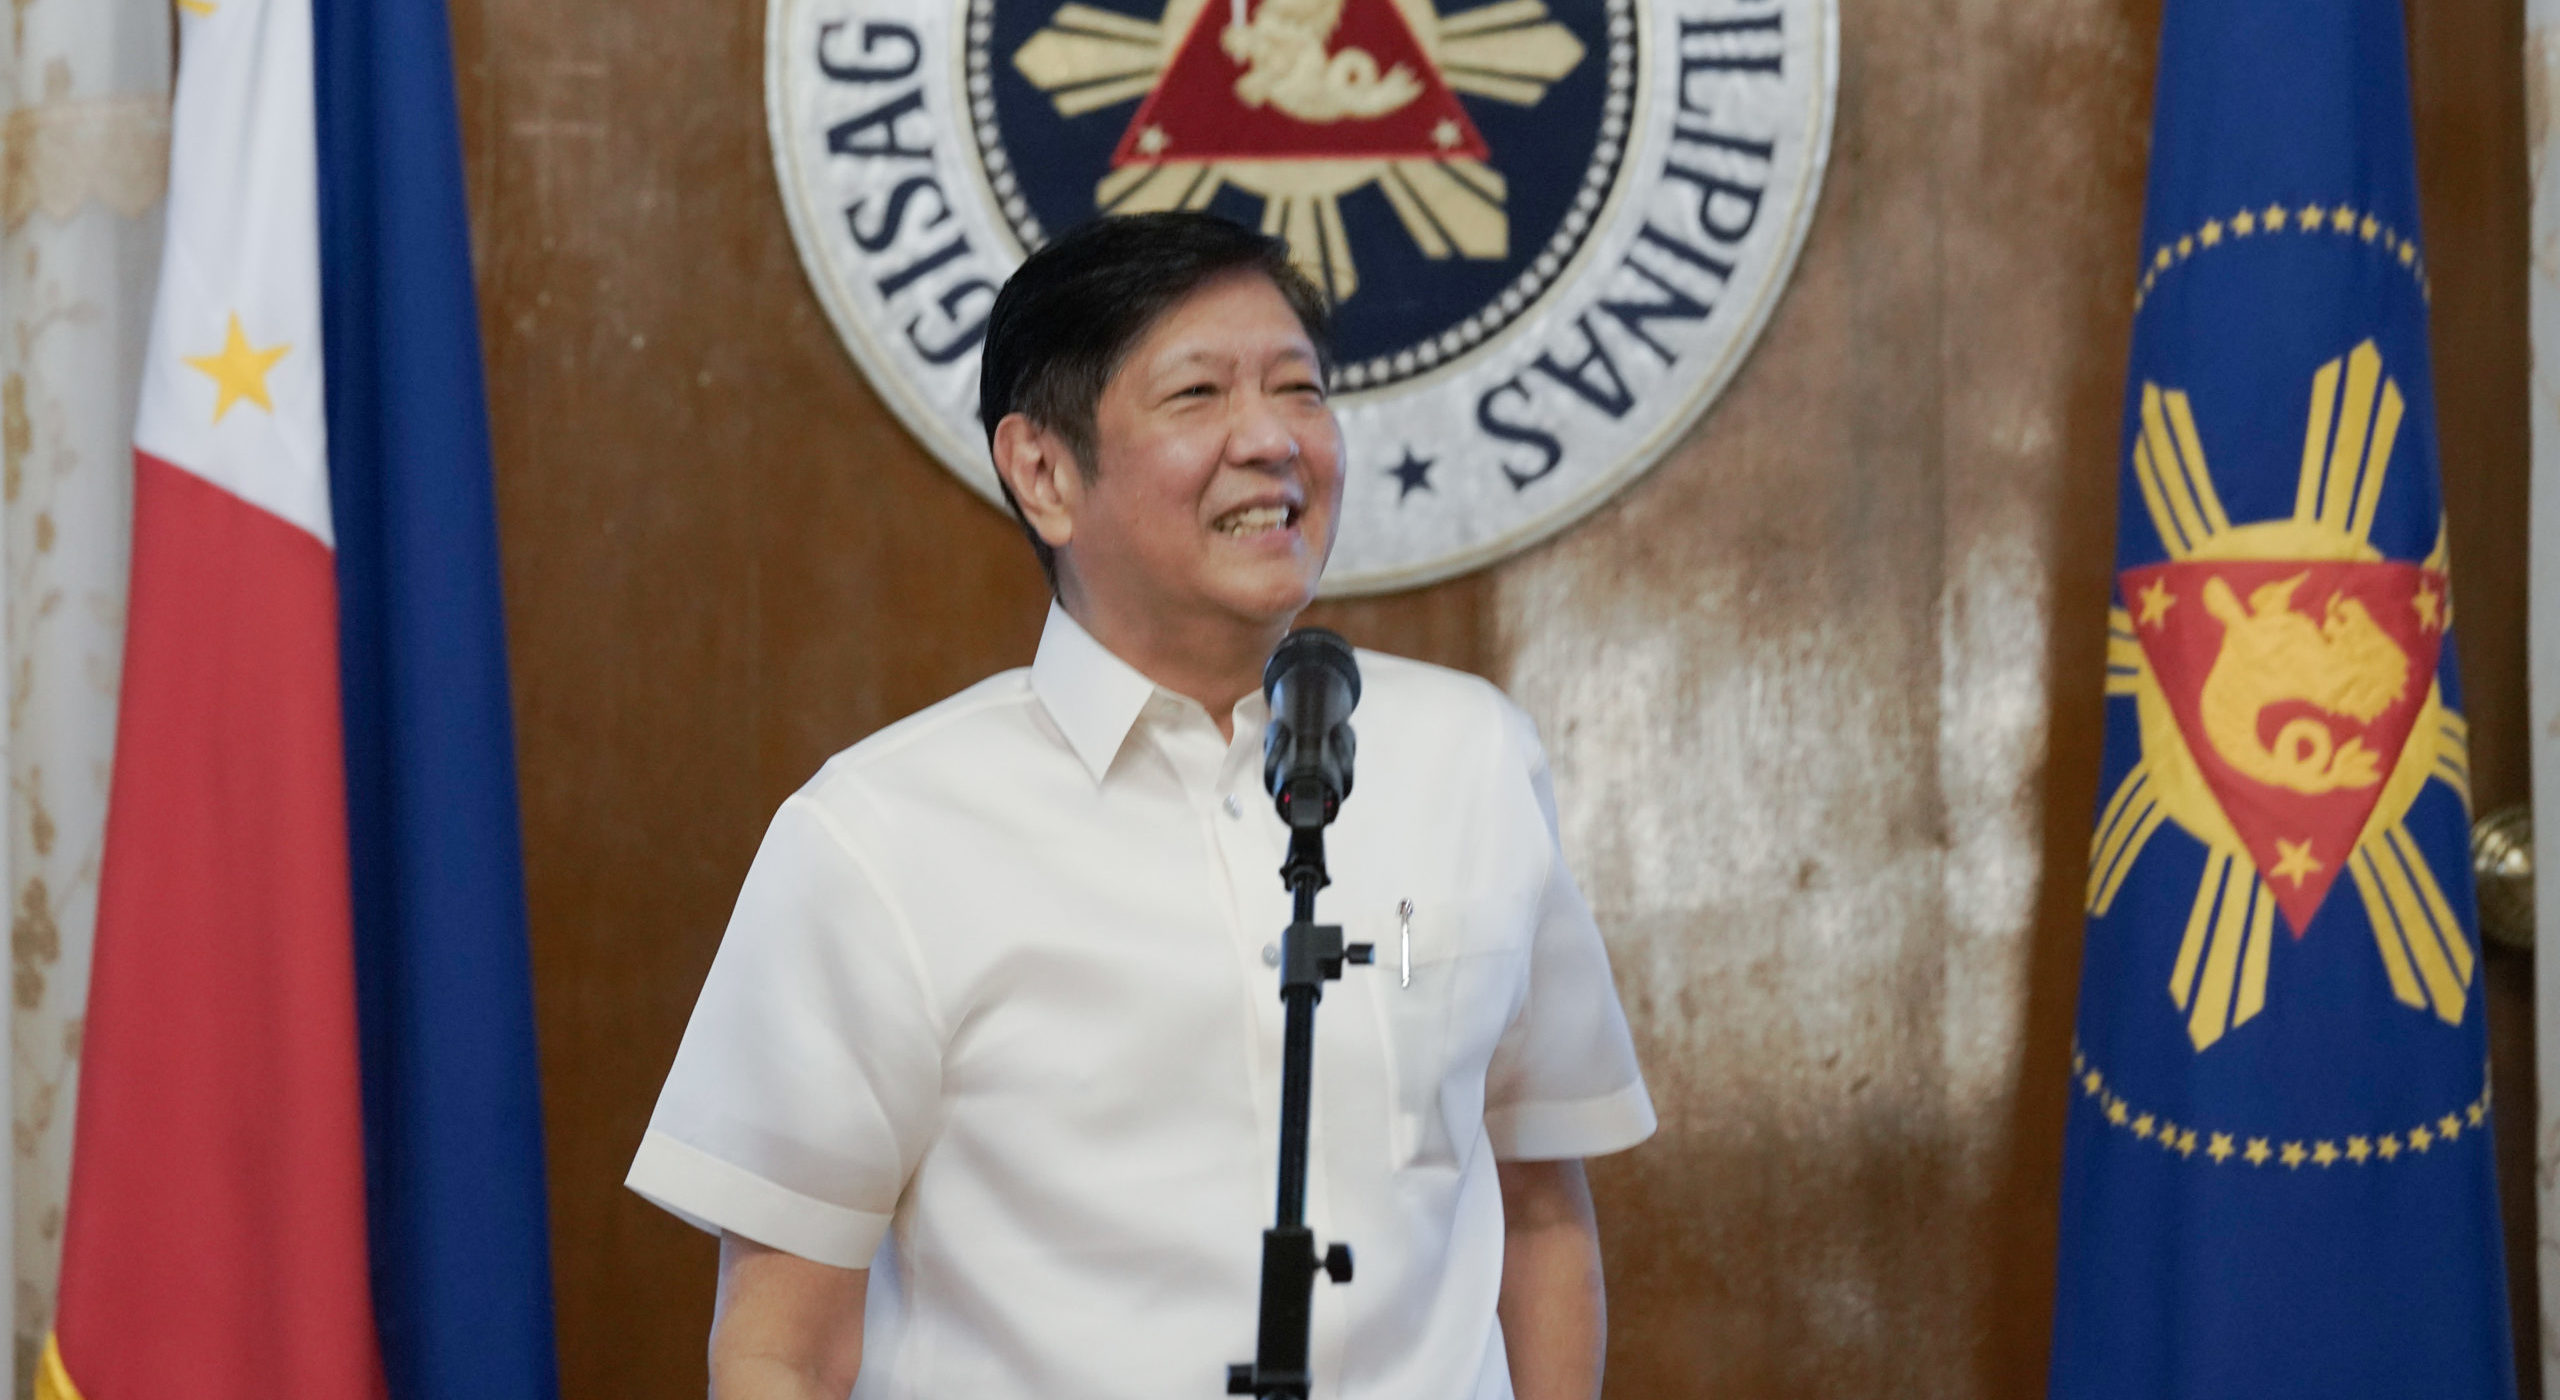 President Ferdinand Marcos Jr. has announced that the Department of Energy (DOE) has already allowed a petroleum company to start surveying its drilling locations for exploration and appraisal at the Cadlao oil field in Palawan.